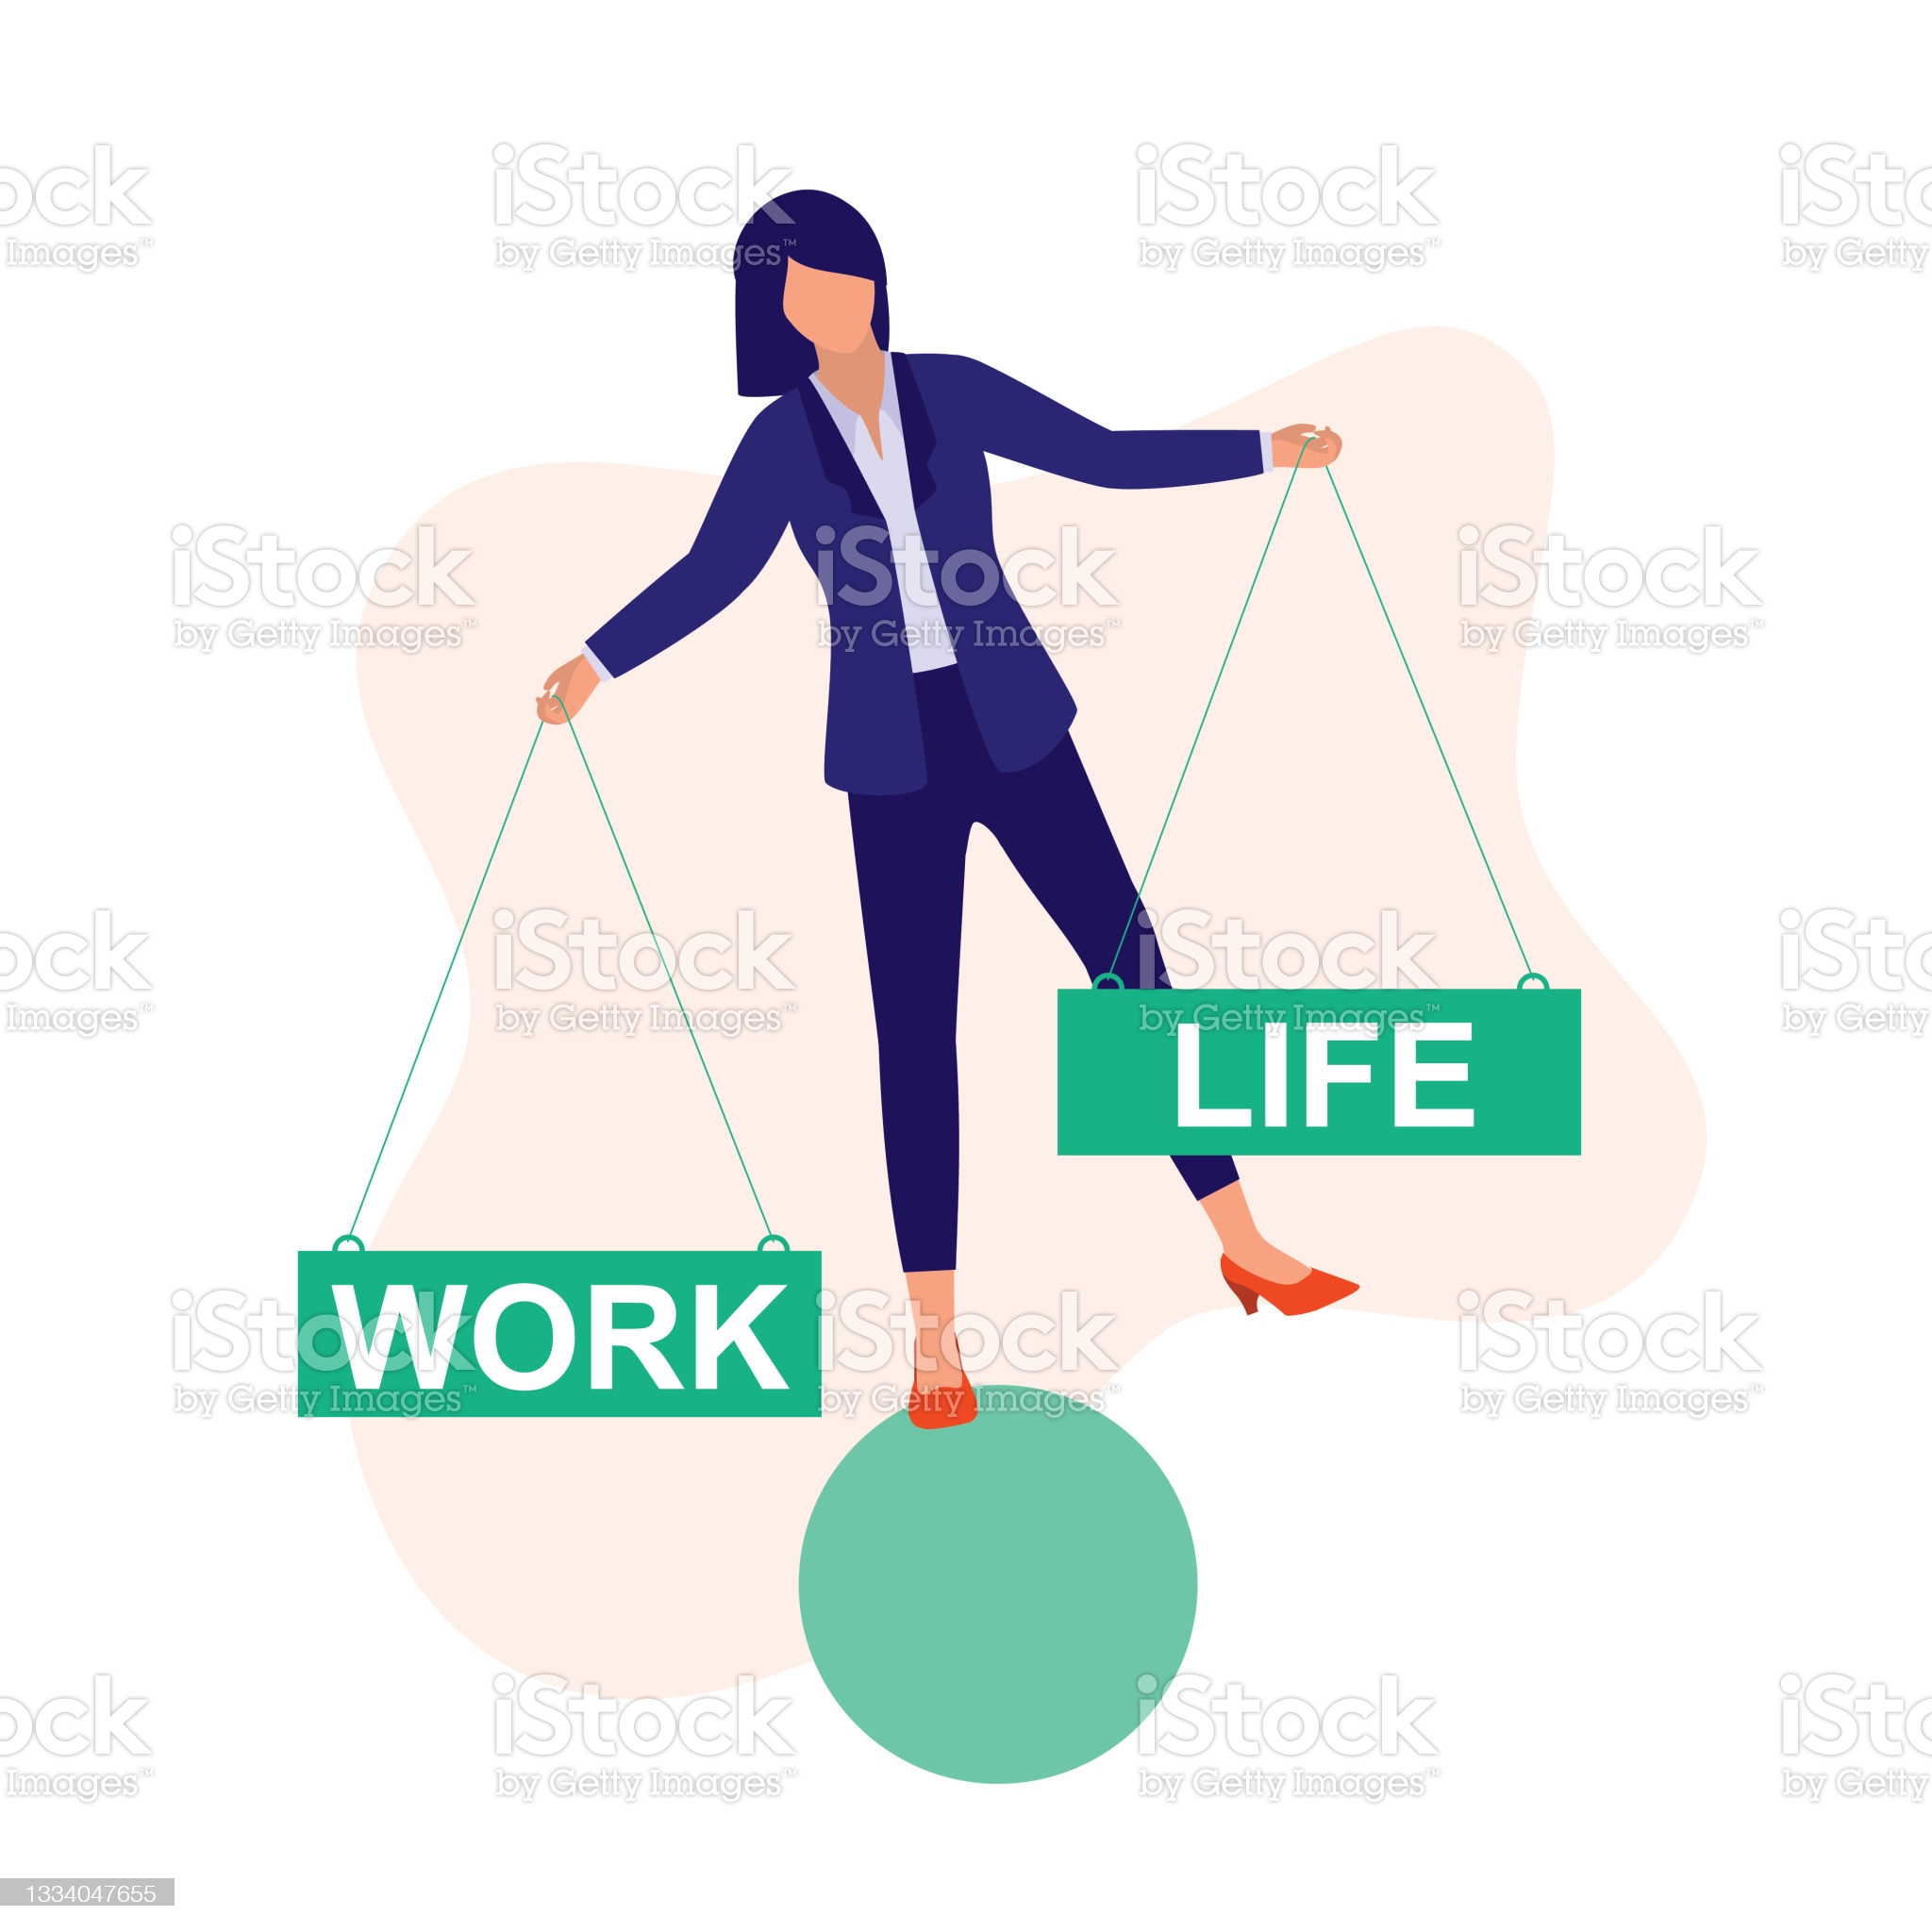 Woman Balancing On Ball. Full Length, Isolated On Plain Color Background. Vector, Illustration, Flat Design, Character.